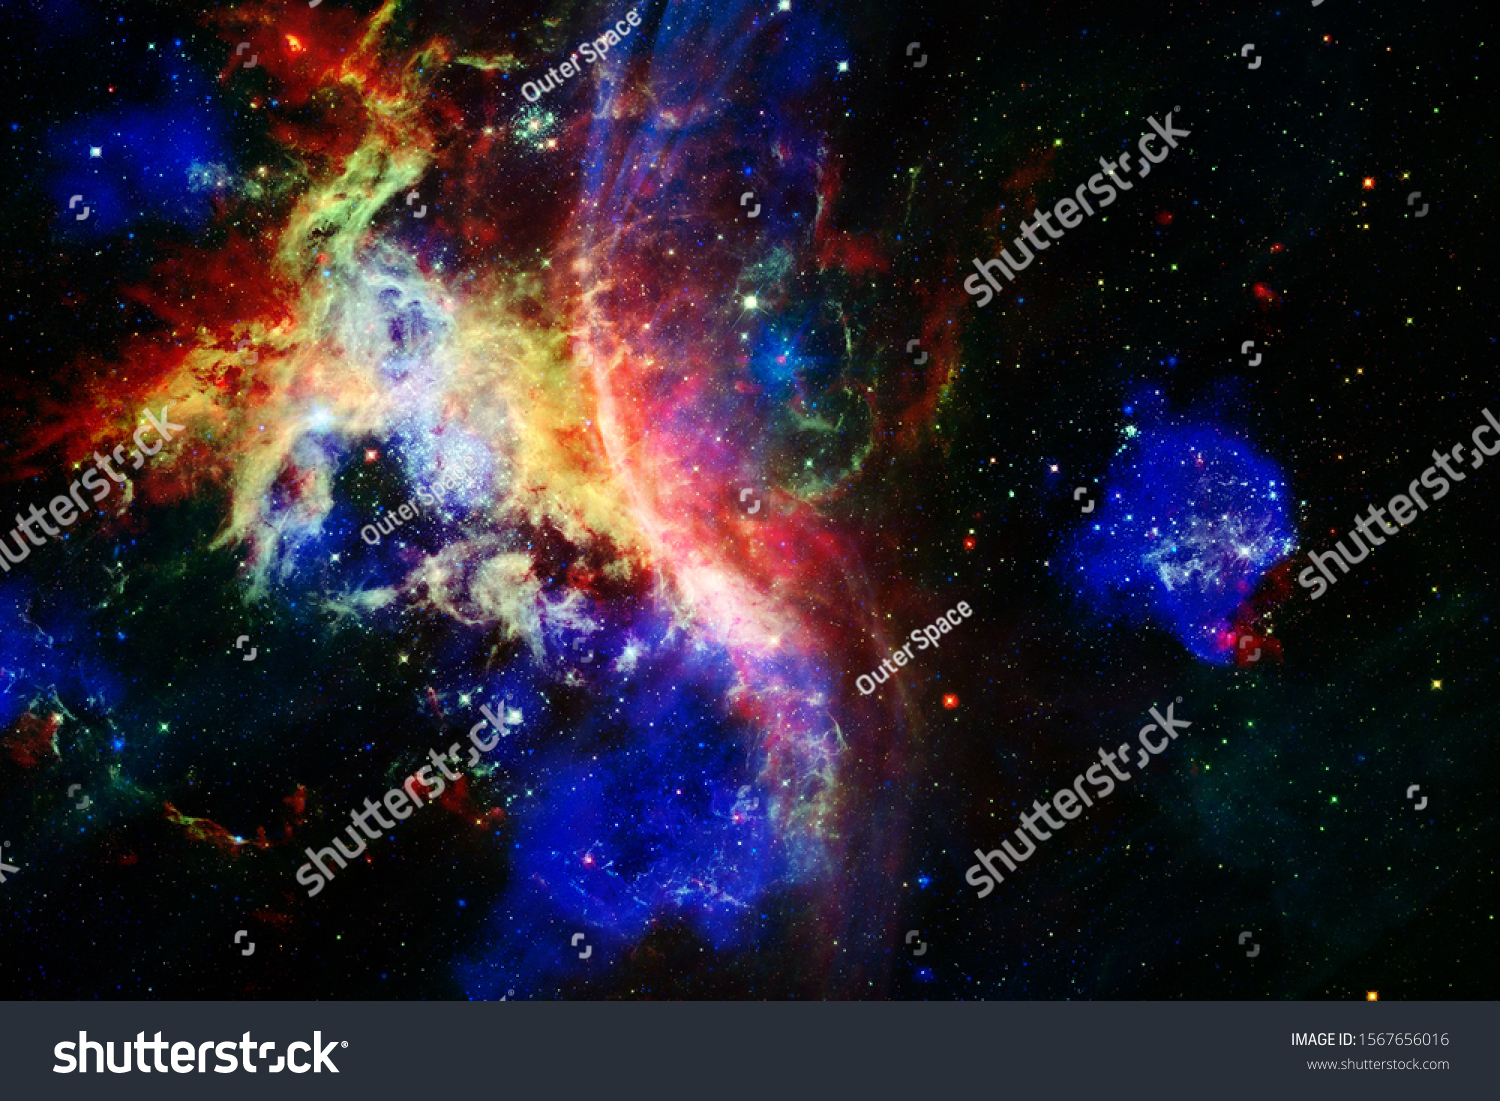 Nebula and galaxies in space. Elements of this image furnished by NASA. #1567656016